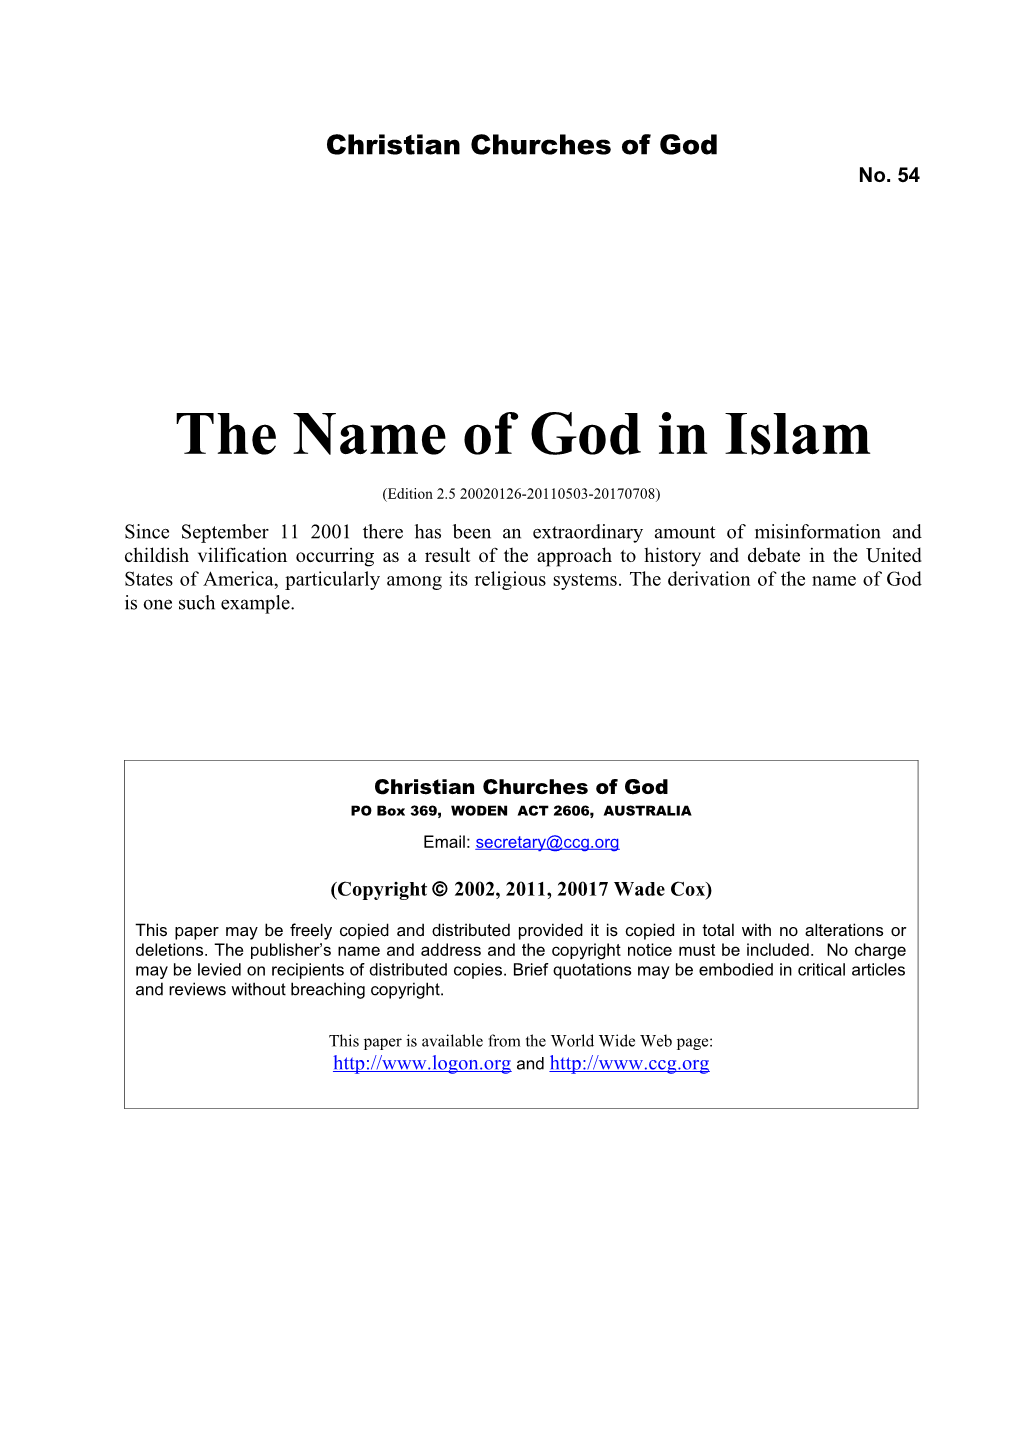 The Name of God in Islam (No. 54)